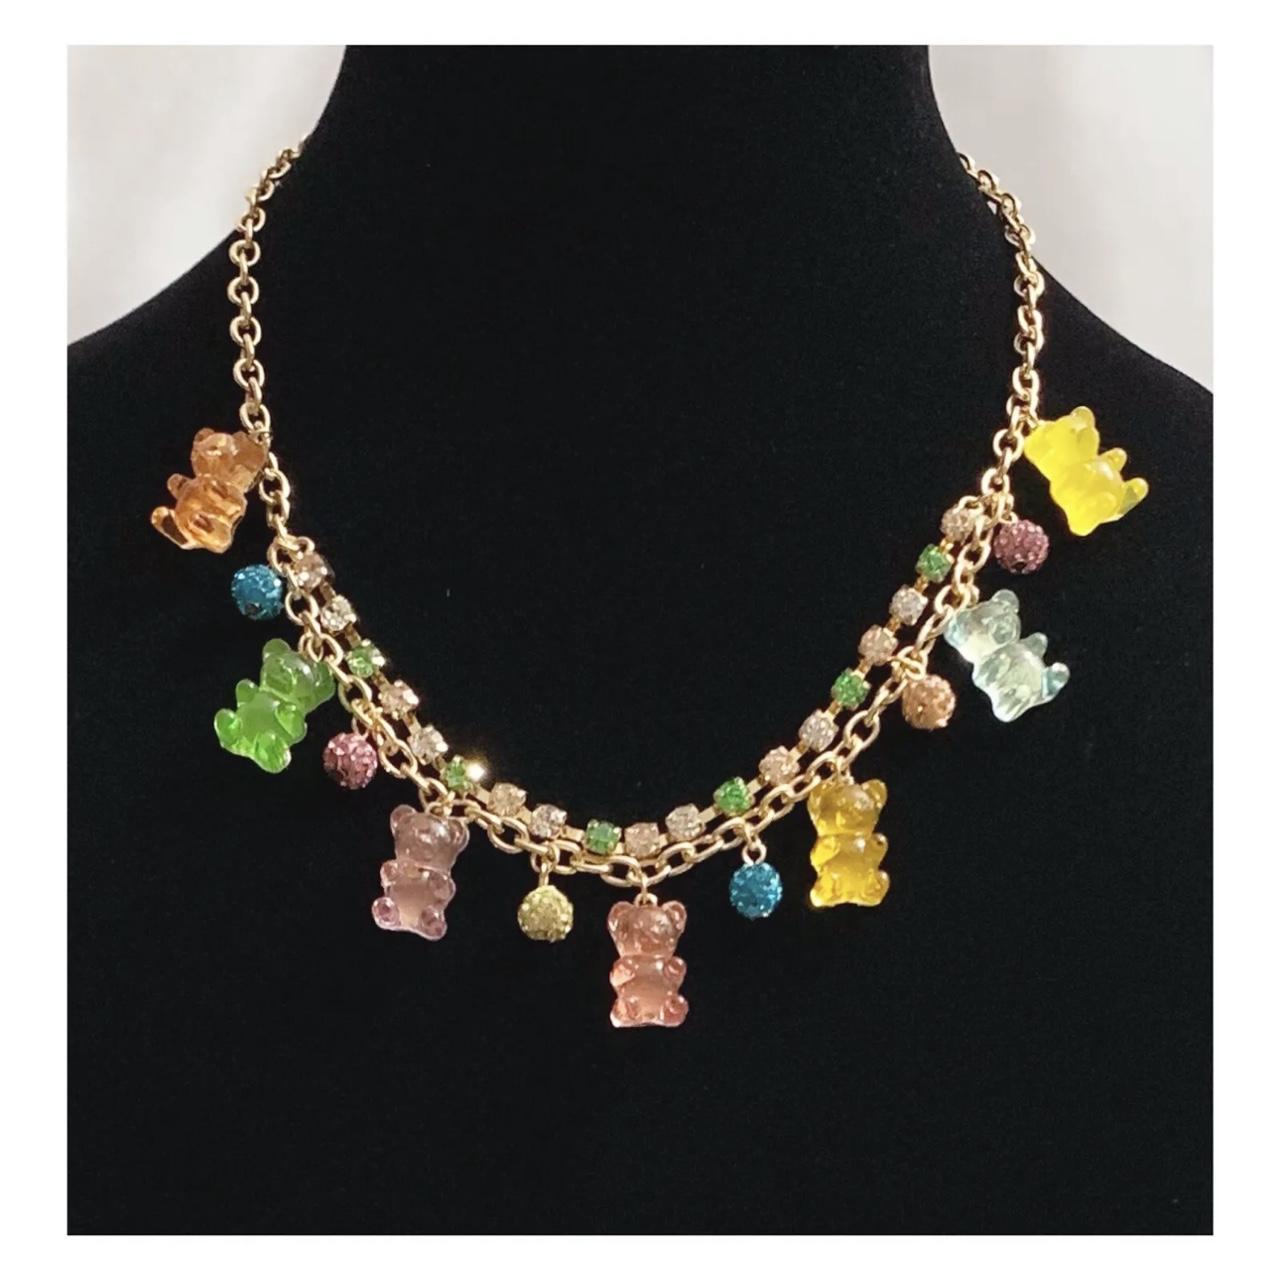 Betsey Johnson Gummy Bear Necklace & Earrings Set: Sweet Style for Any  Occasion - Etsy